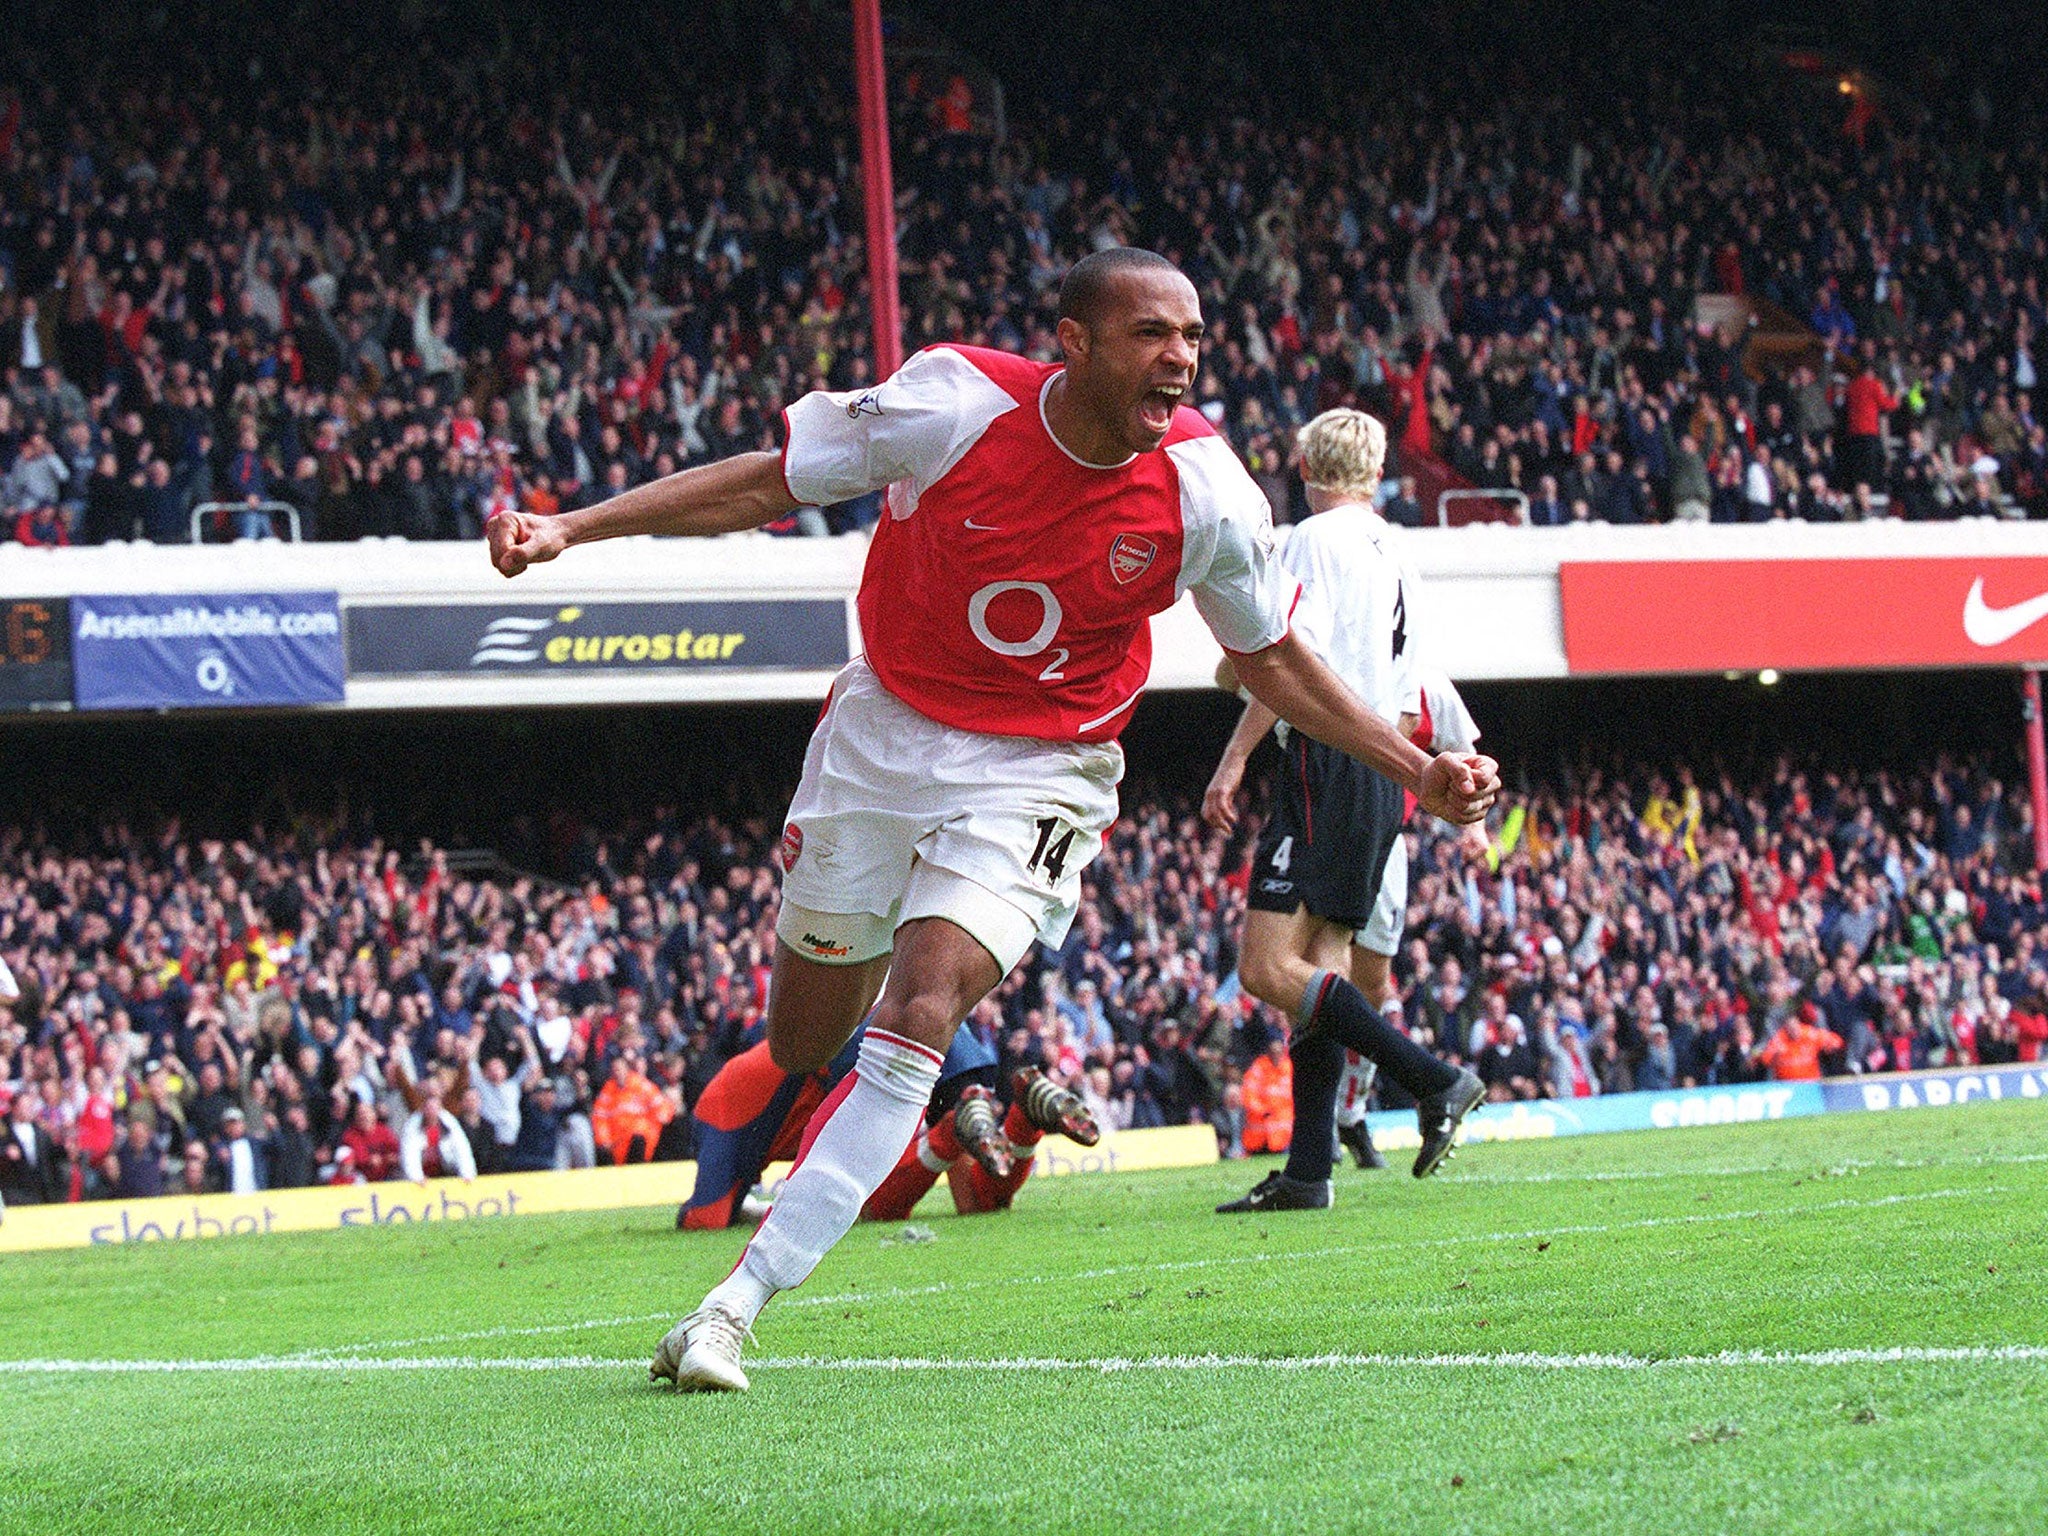 Thierry Henry celebrates scoring against Liverpool